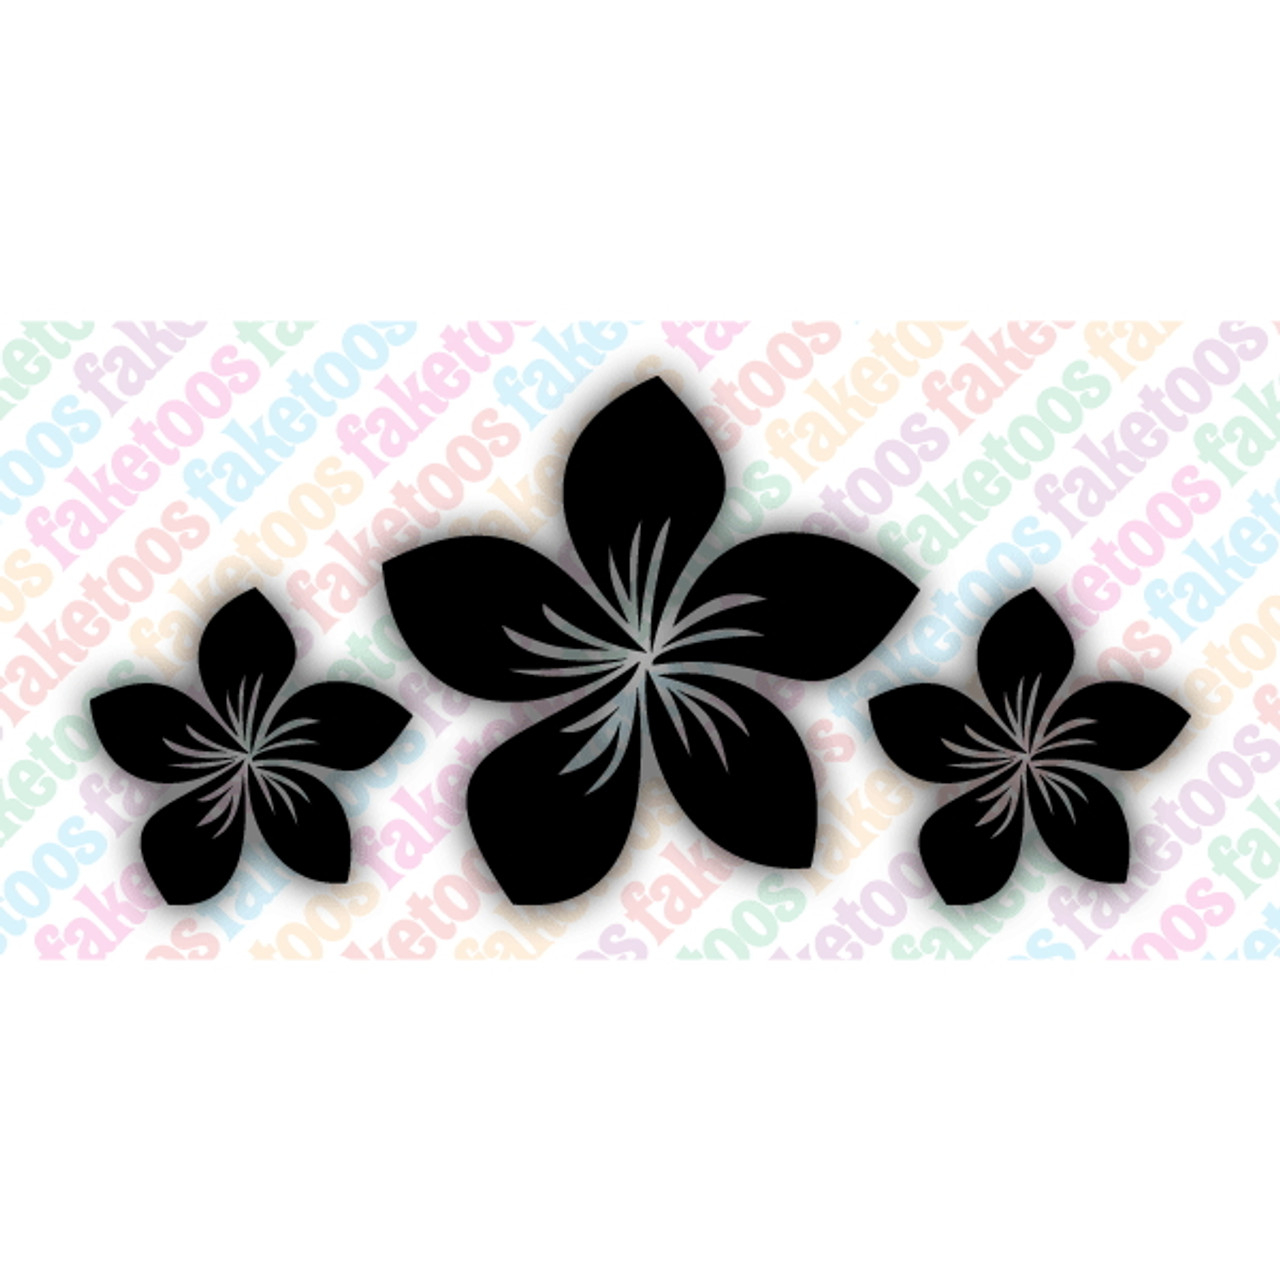 Glitter tattoo stencils to make amazing sparkly tattoos  Morgan Family  Trust Limelight Company ABN 95 708 557 687